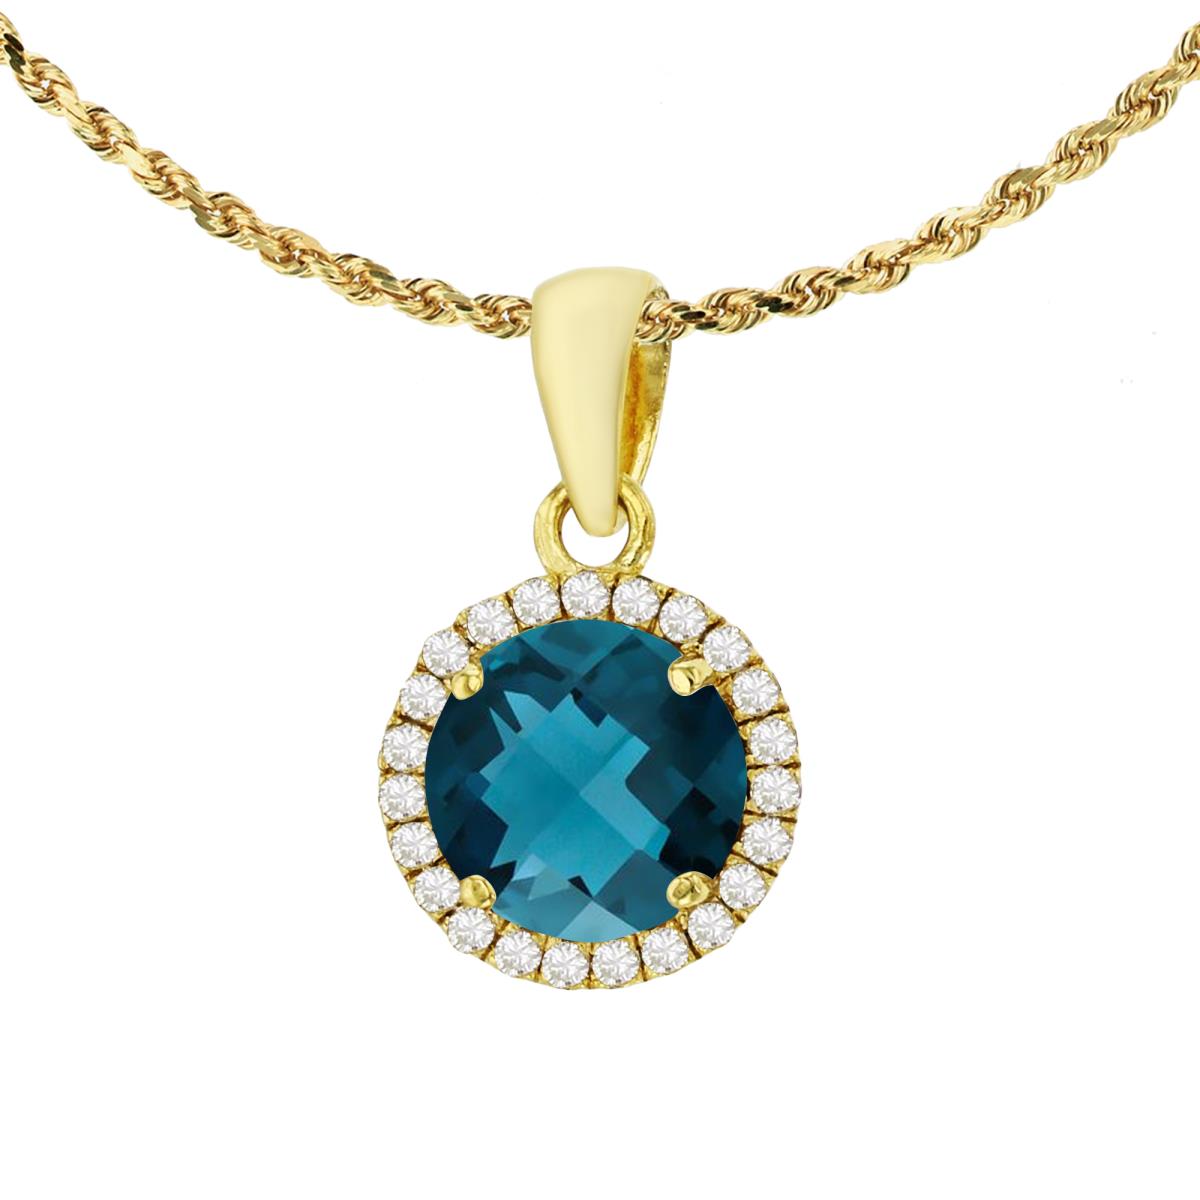 10K Yellow Gold 7mm Round London Blue Topaz & 0.12 CTTW Diamond Halo 18" Rope Chain Necklace